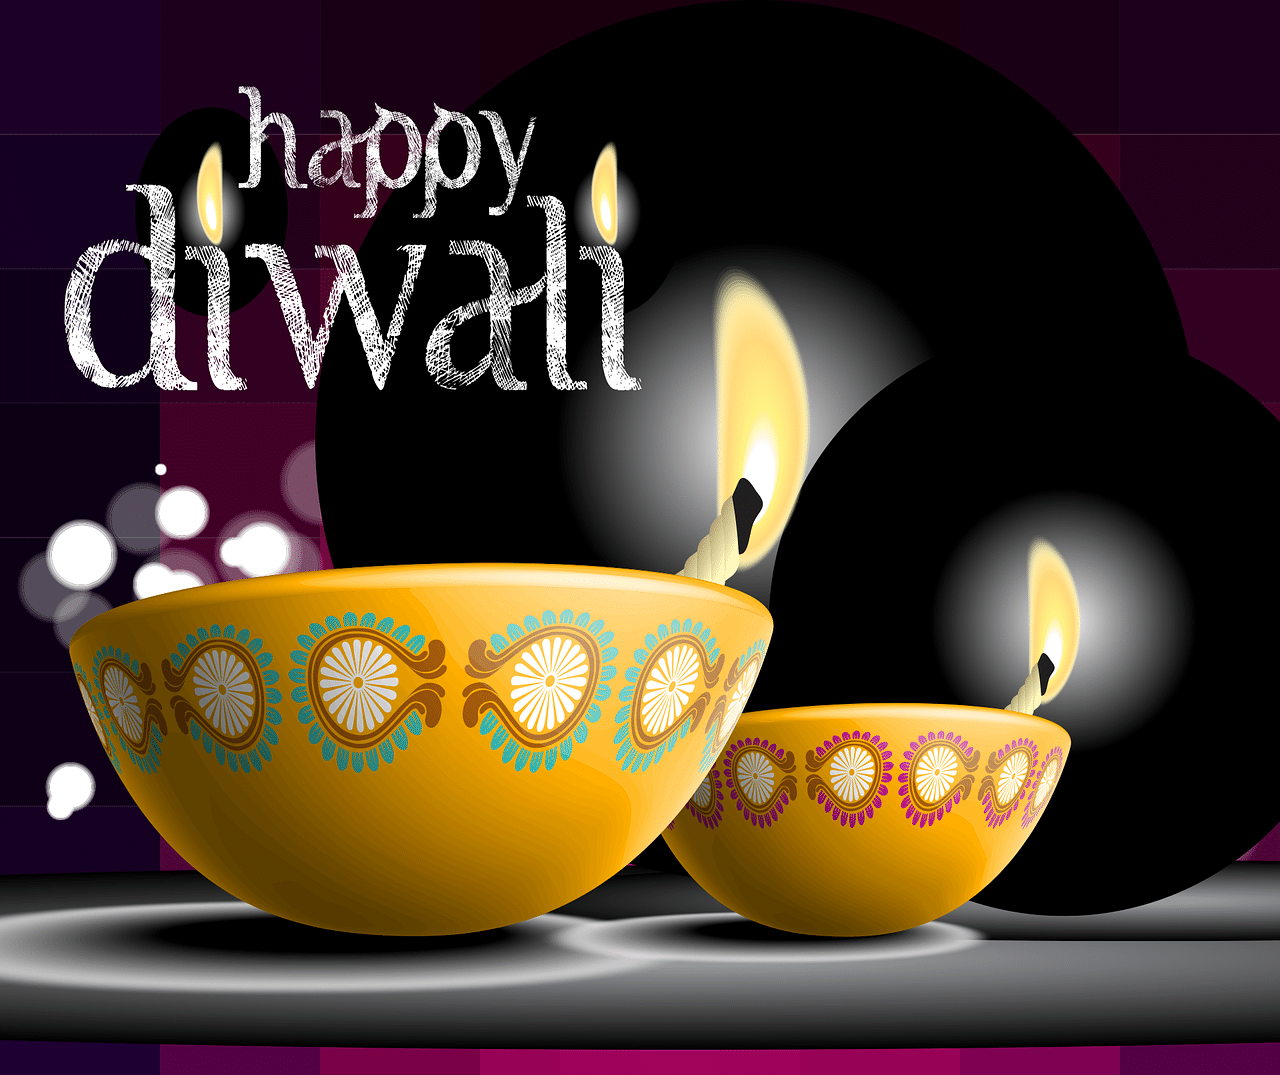 71 Happy Diwali Wishes and Greetings for 2021 - MOM News Daily